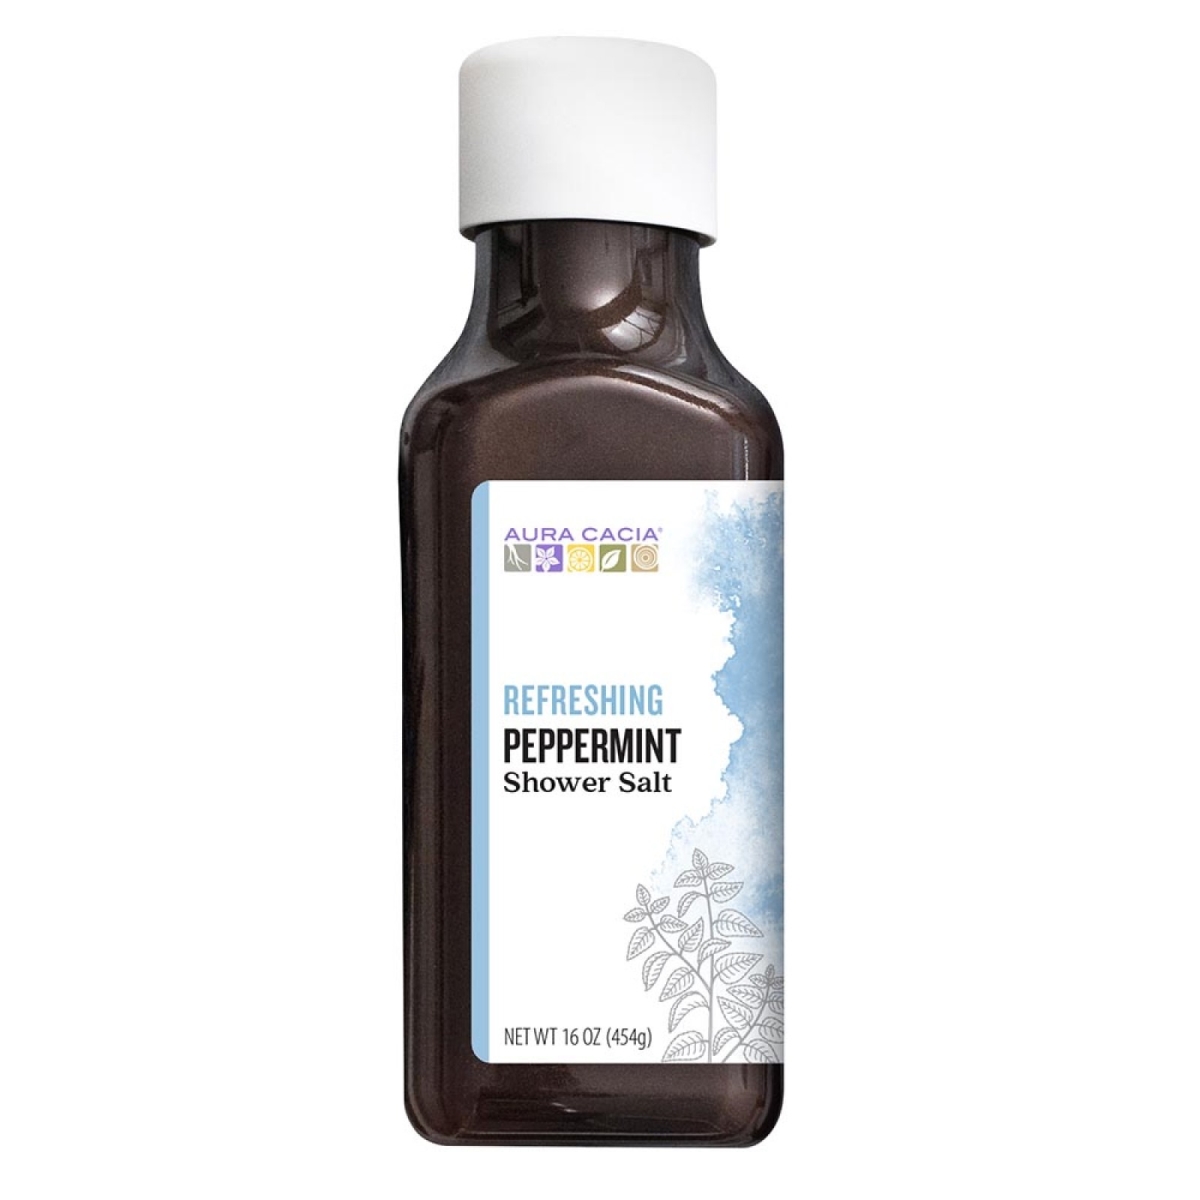 Picture of Aura Cacia 190227 16 oz Refreshing Peppermint Shower Salt